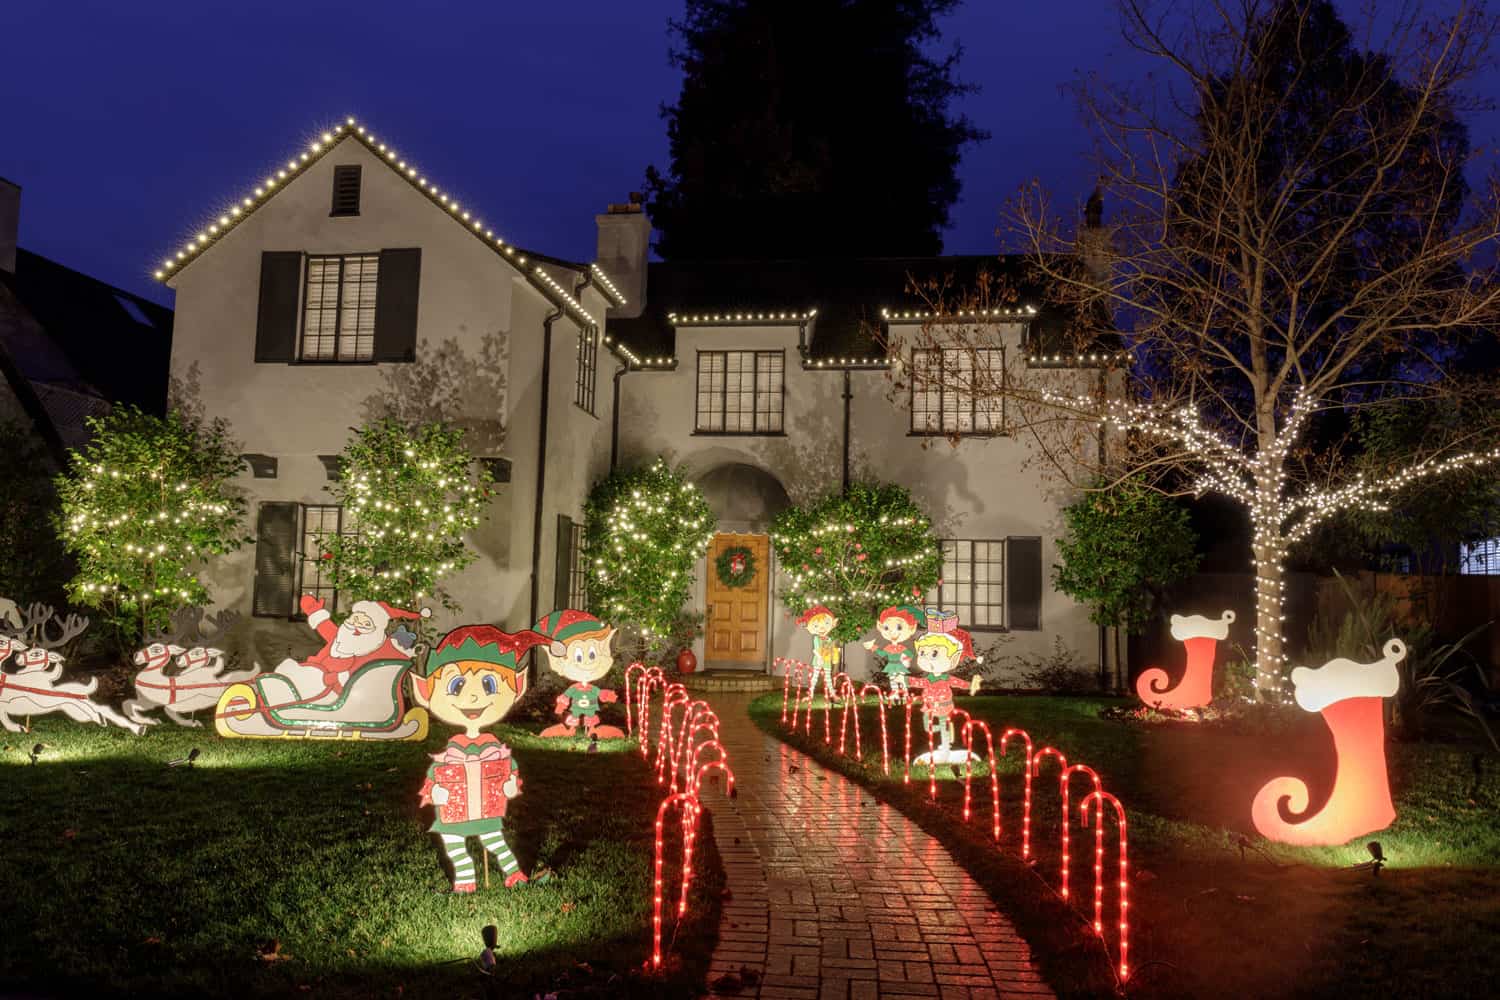 A stone mansion with Christmas decorations up front